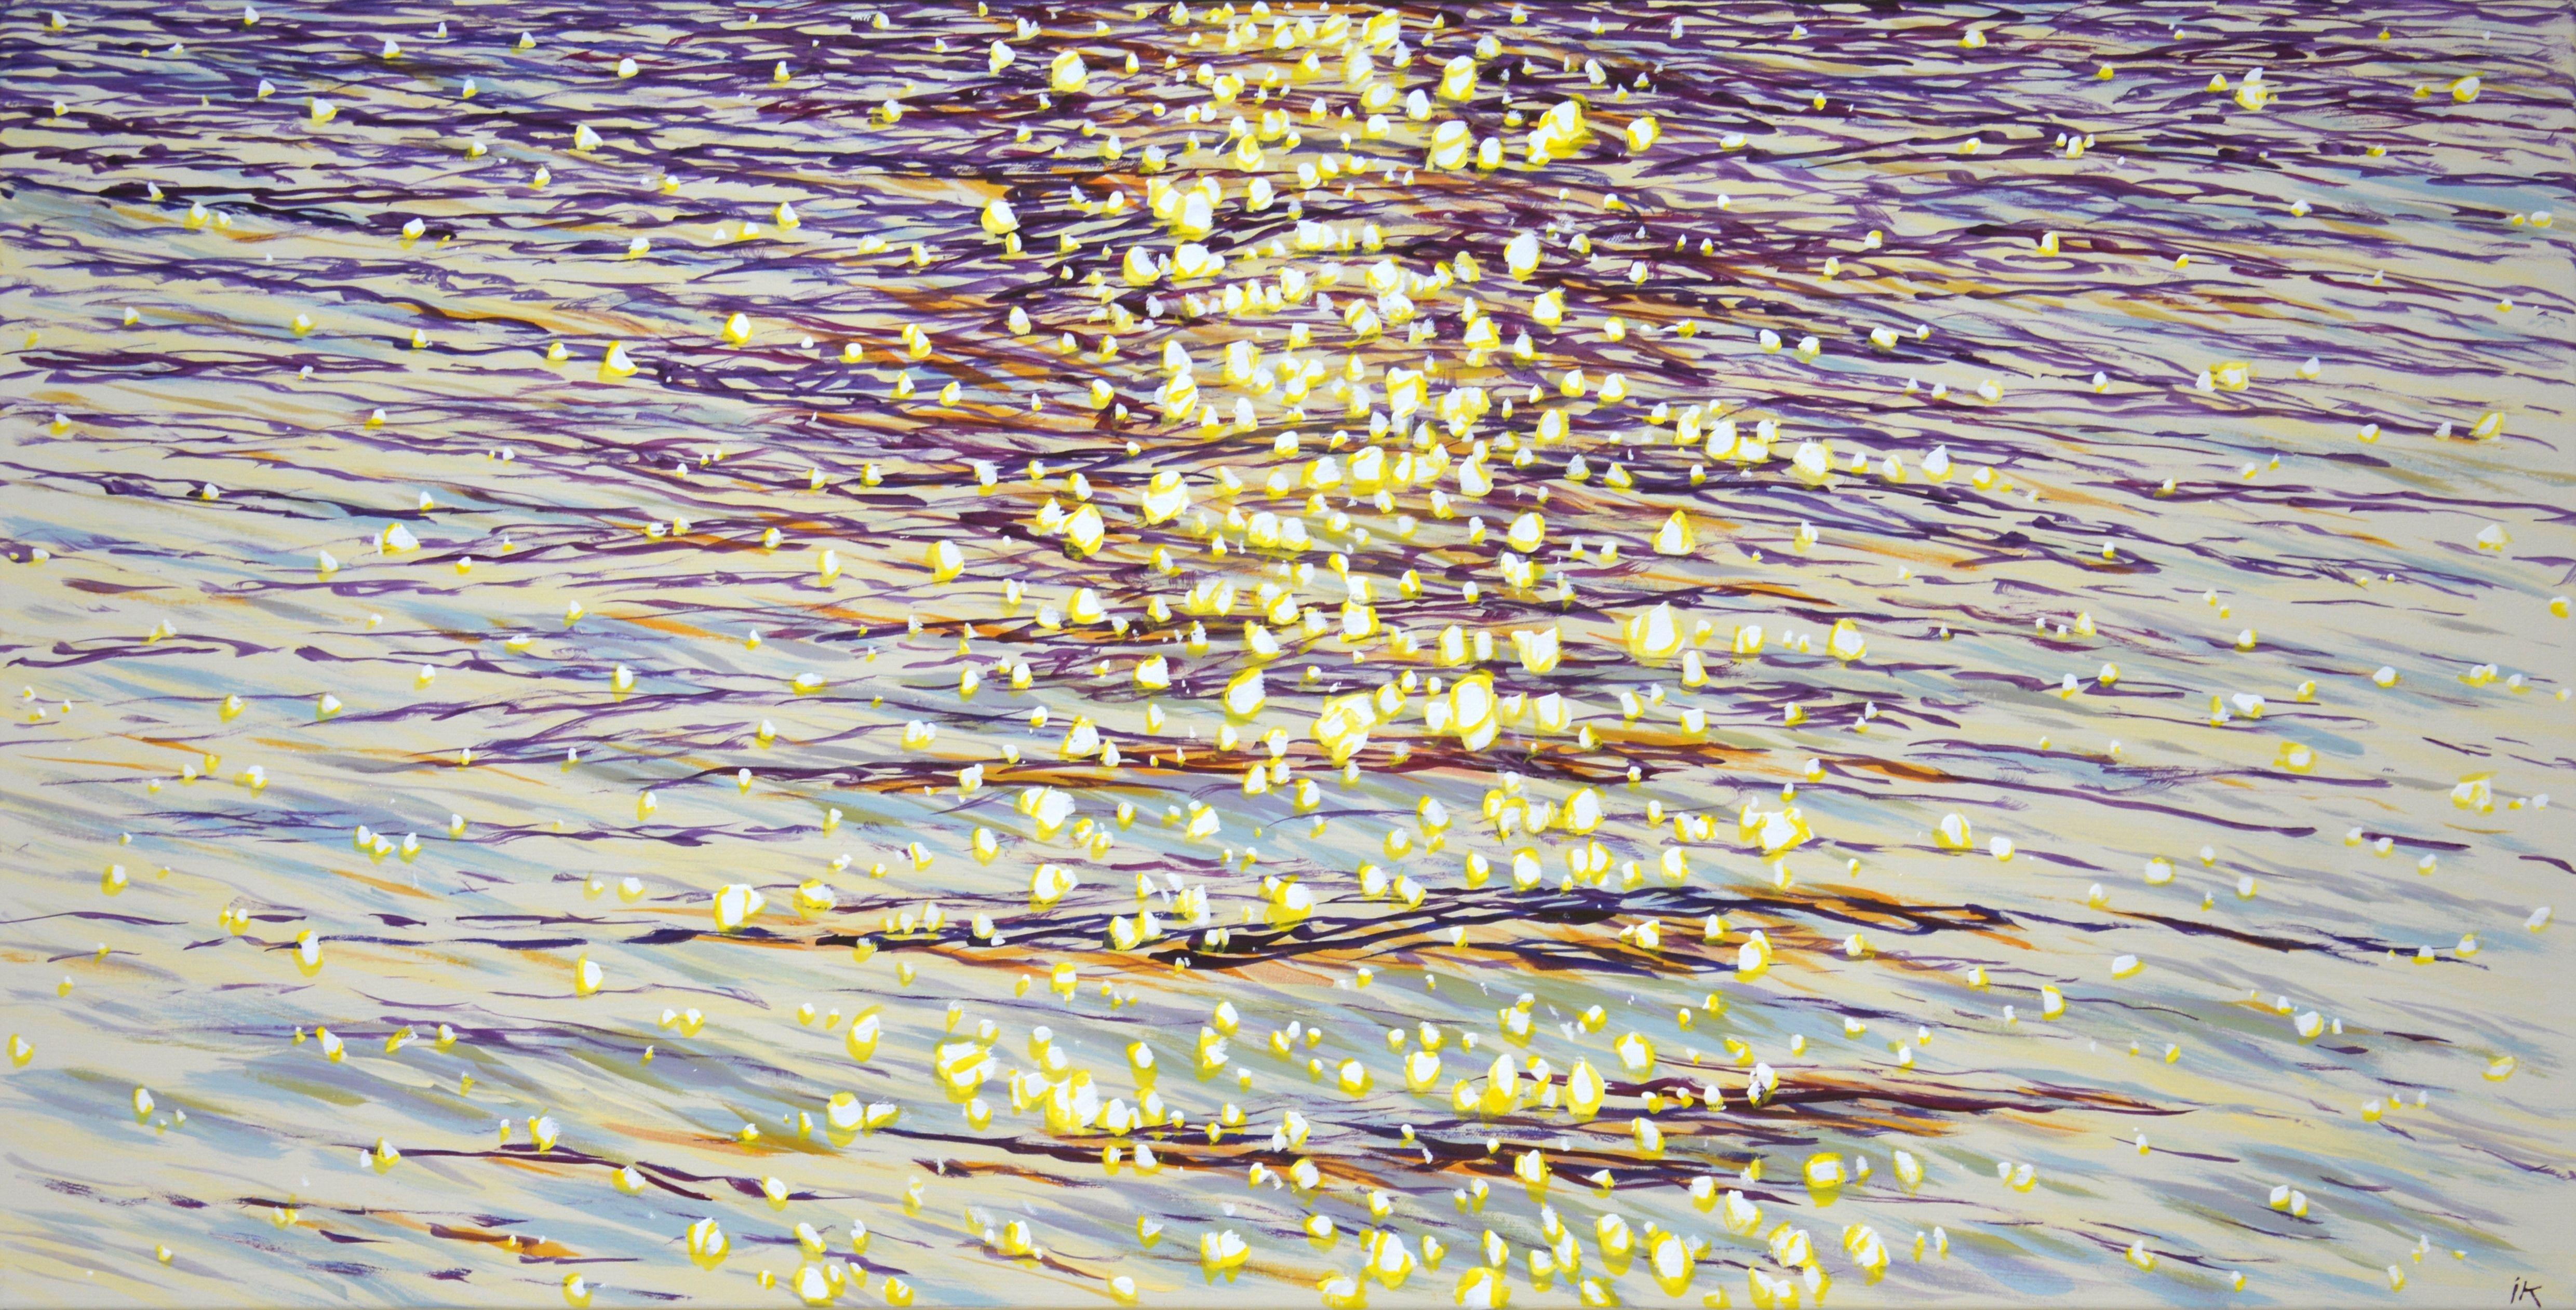 Golden sparks of the ocean. Warm water, waves, serene views, ocean shine, glare on the water create an atmosphere of relaxation, romance. Made in the style of realism. Part of a permanent series of seascapes. Good quality painting. Used high quality